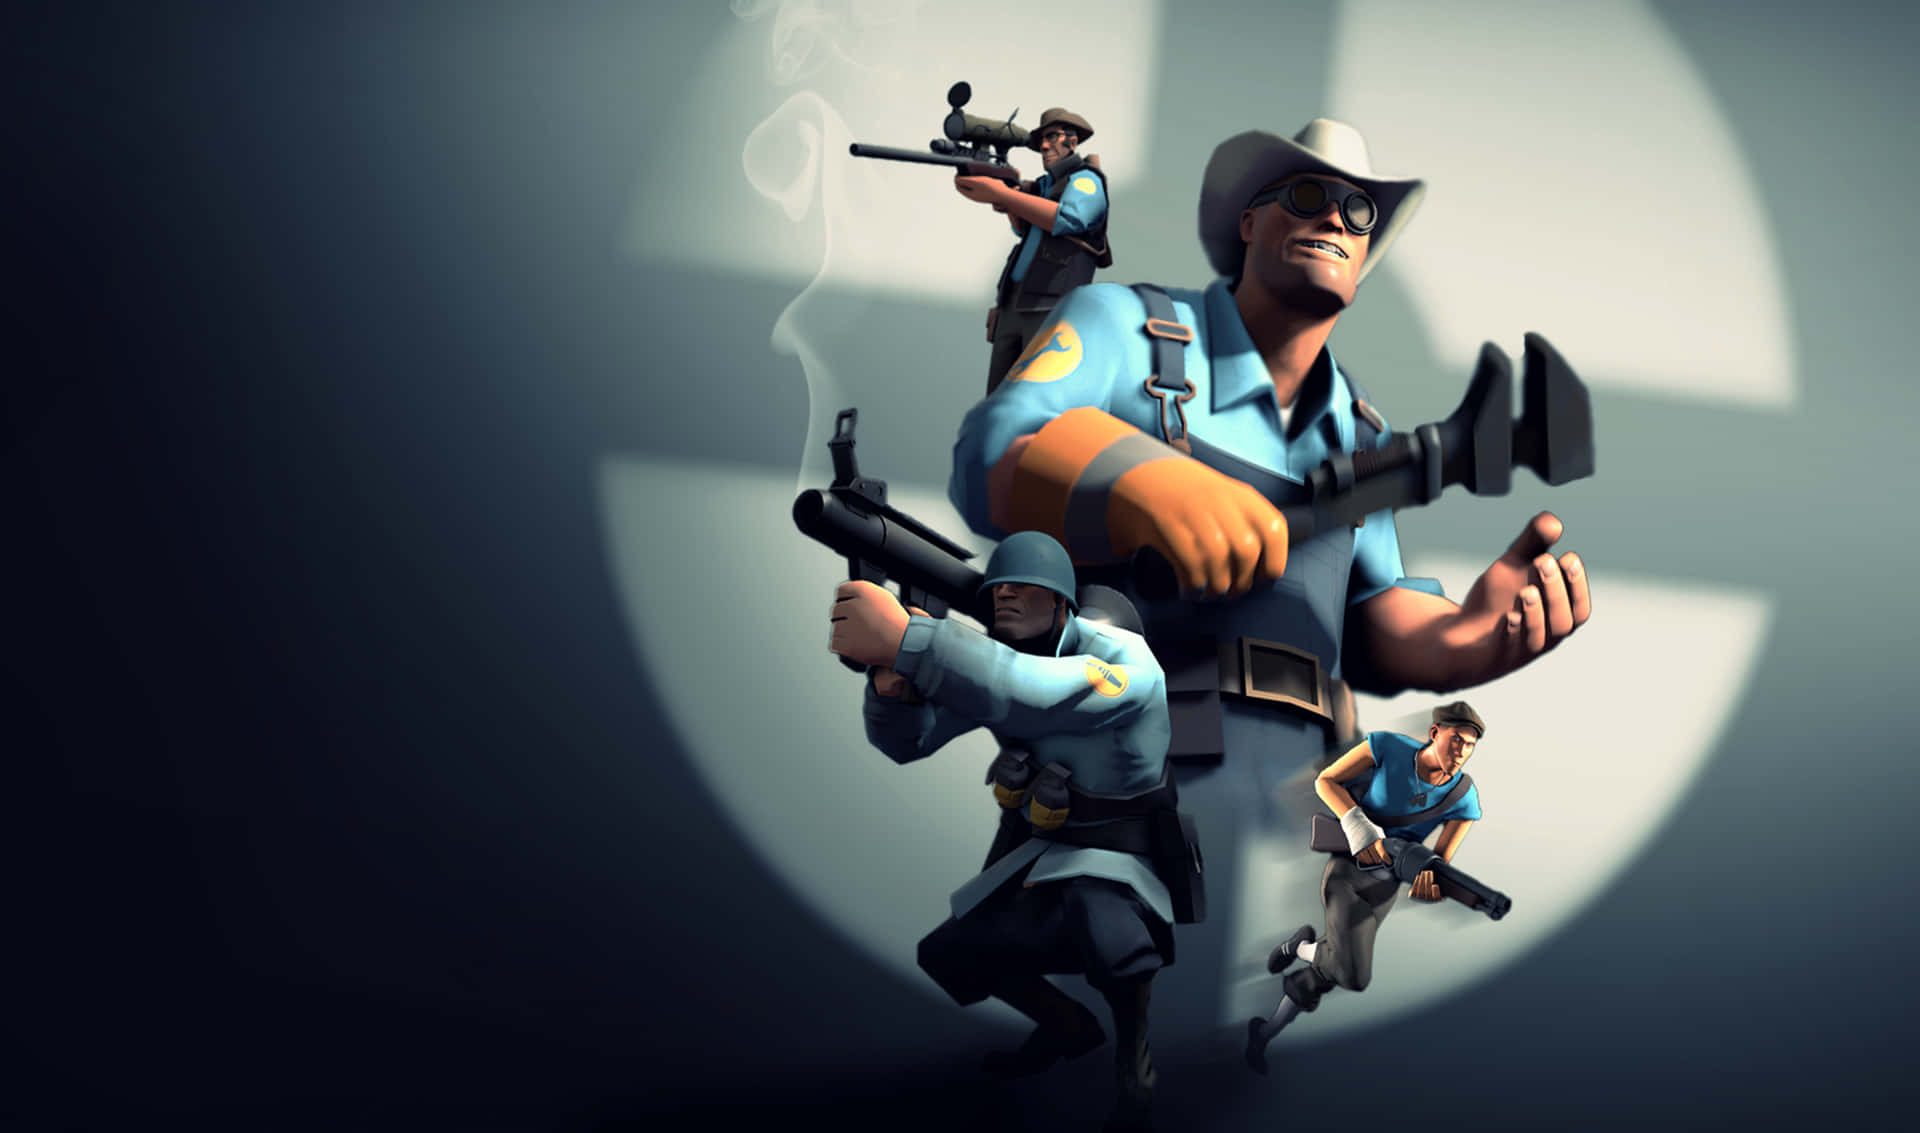 2440x1440 Team Fortress 2 Blue Soldier And Engineer Background